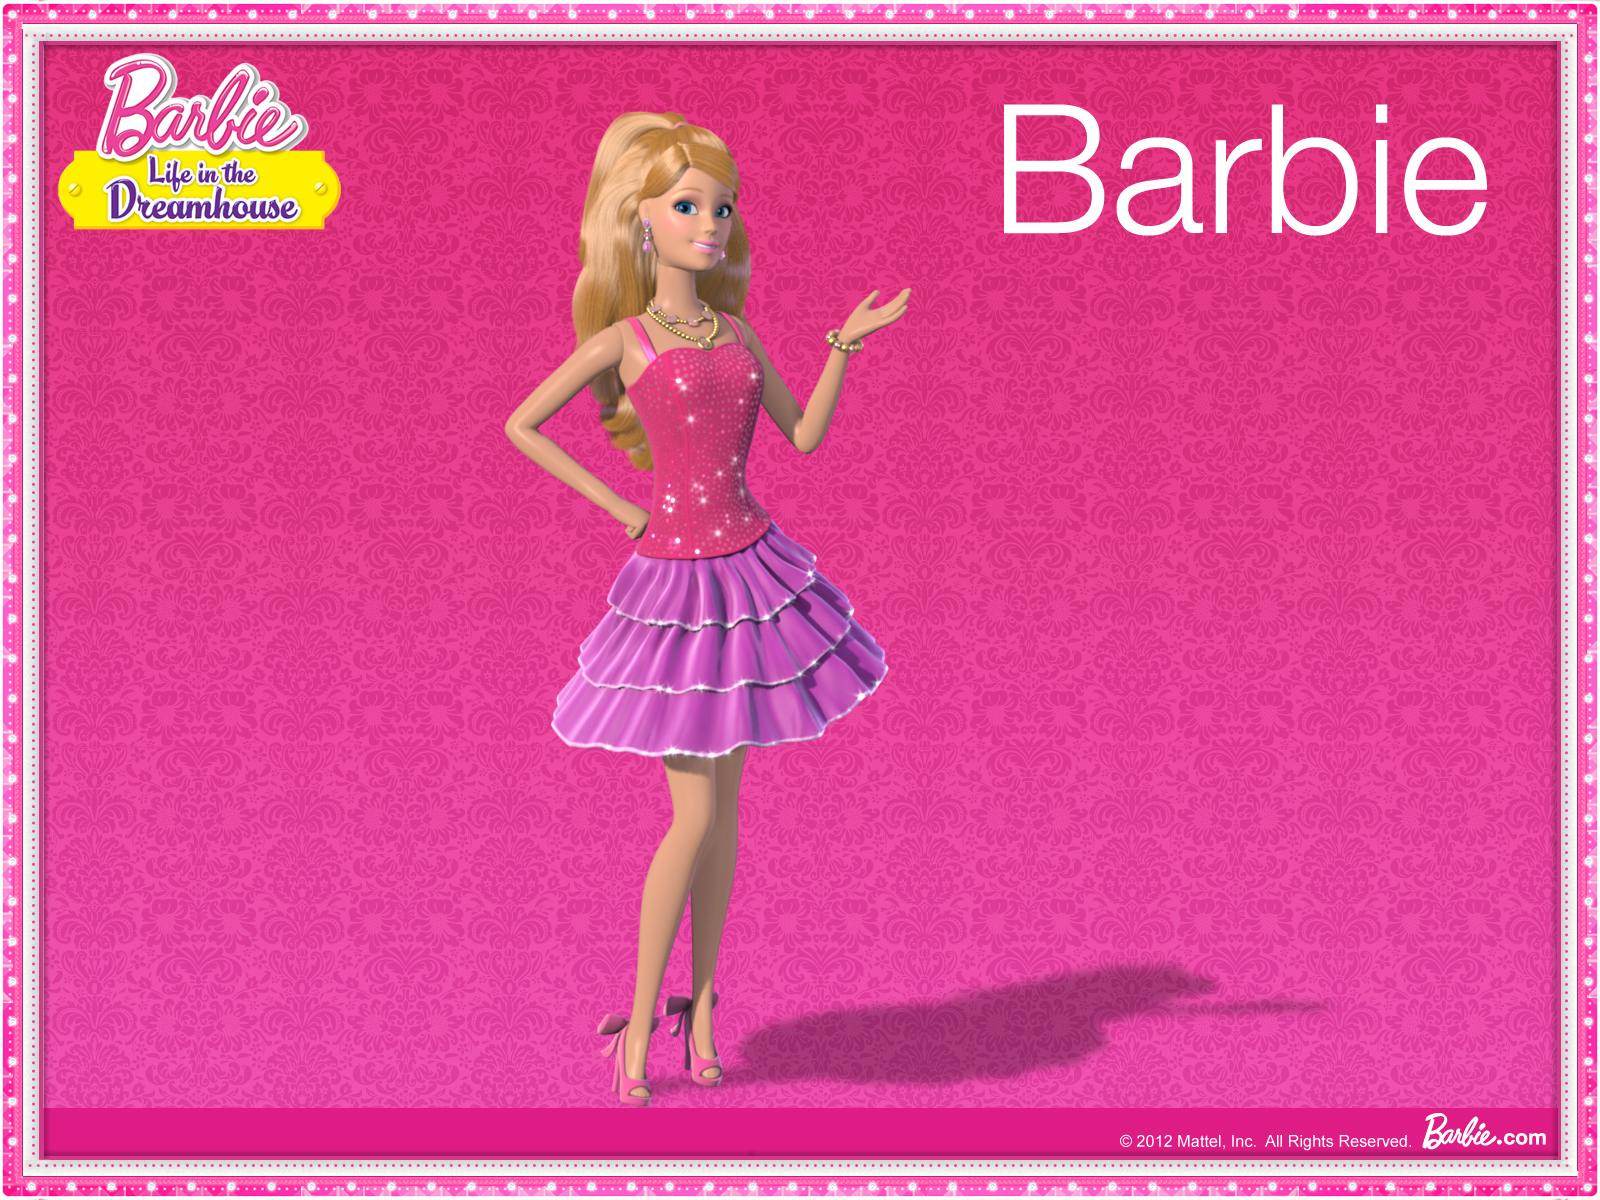 barbie life in the dreamhouse Barbie Movies Wallpaper